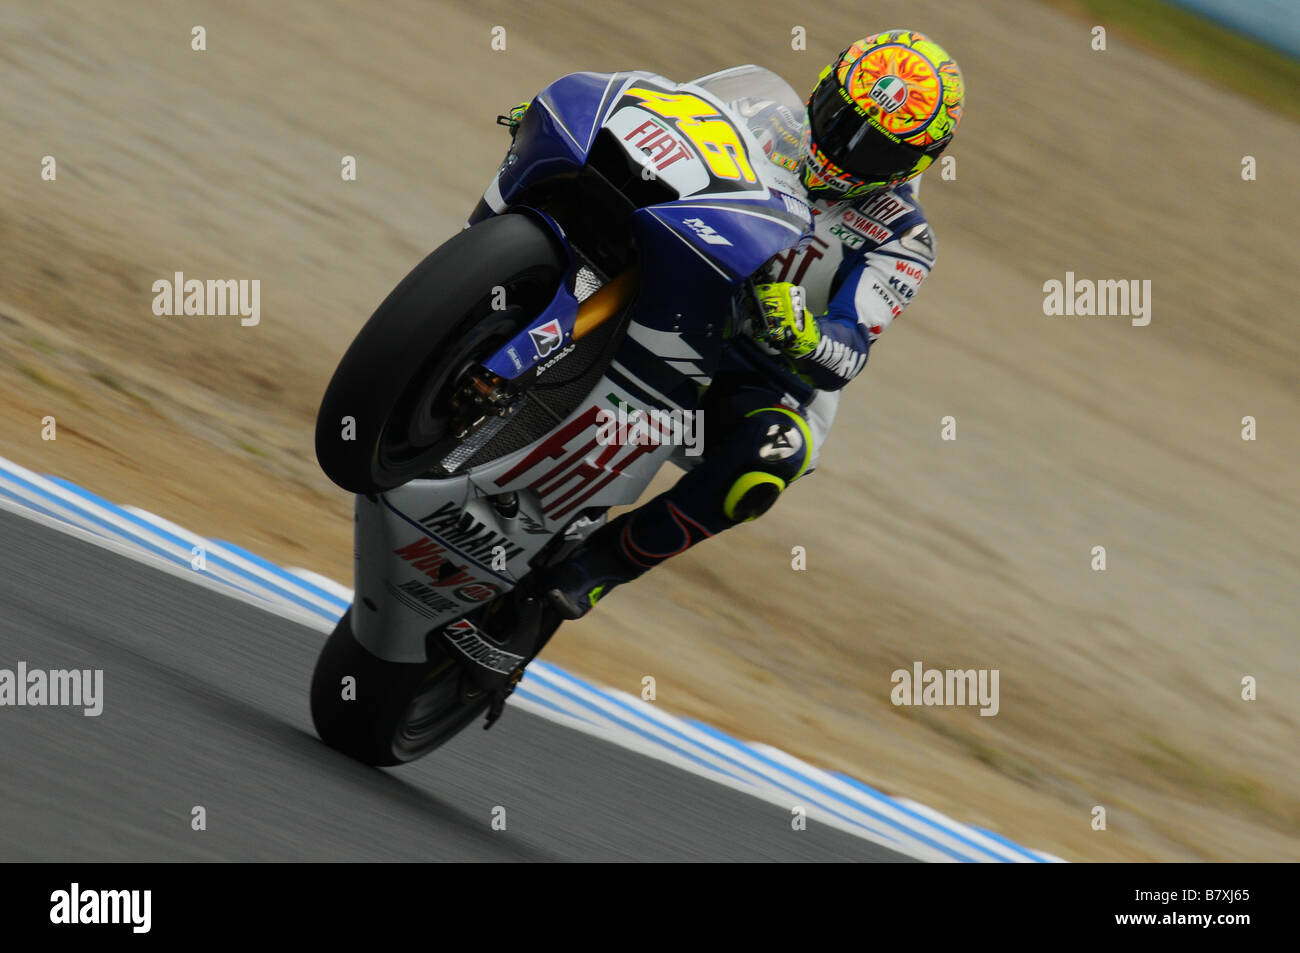 Valentino Rossi Fiat Yamaha SEPTEMBER 28 2008 Motor Valentino Rossi of Italy and the Fiat Yamaha team rides in action during Round 15 of the 2008 MotoGP World Championship the Japanese Grand Prix held at the Motegi Twin Ring circuit on September 28 2008 in Motegi Japan Photo by Masakazu Watanabe AFLO SPORT 0005 Stock Photo